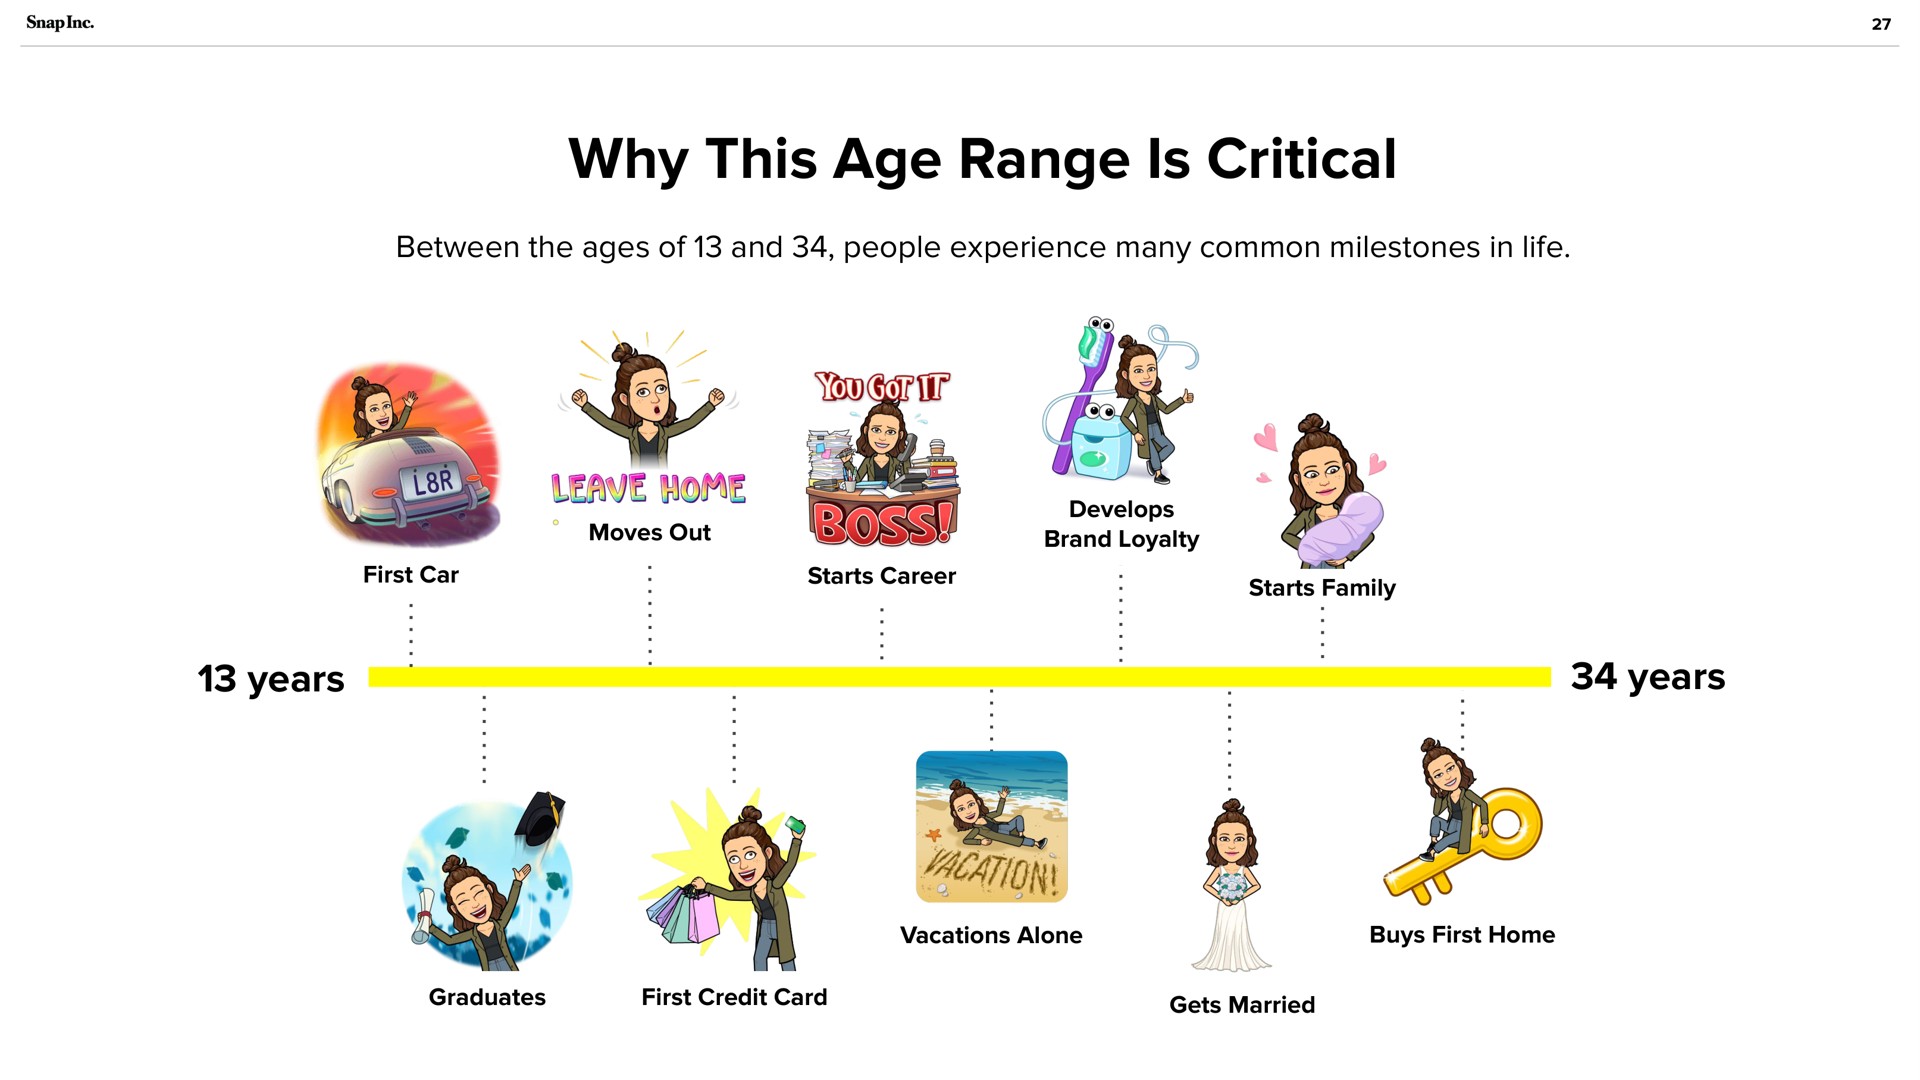 why this age range is critical | Snap Inc